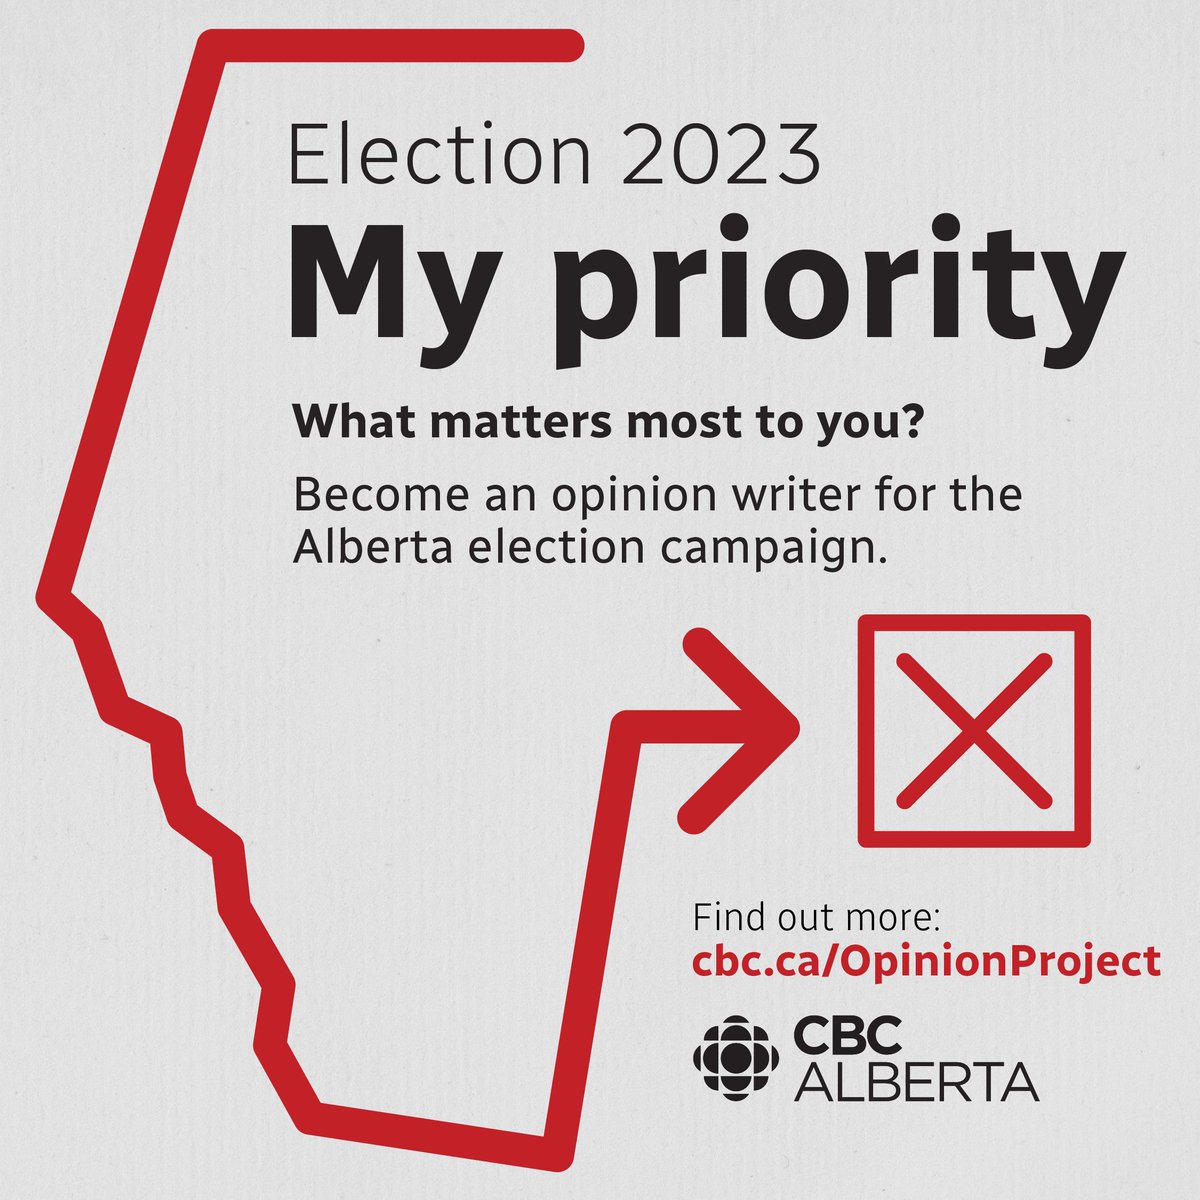 Alberta Election callout for writers CBC is accepting pitches for a special opinion project leading up to the spring election. This is a paid writing opportunity open to all Albertans. Know someone who'd be perfect? Share this with them. Details at cbc.ca/OpinionProject